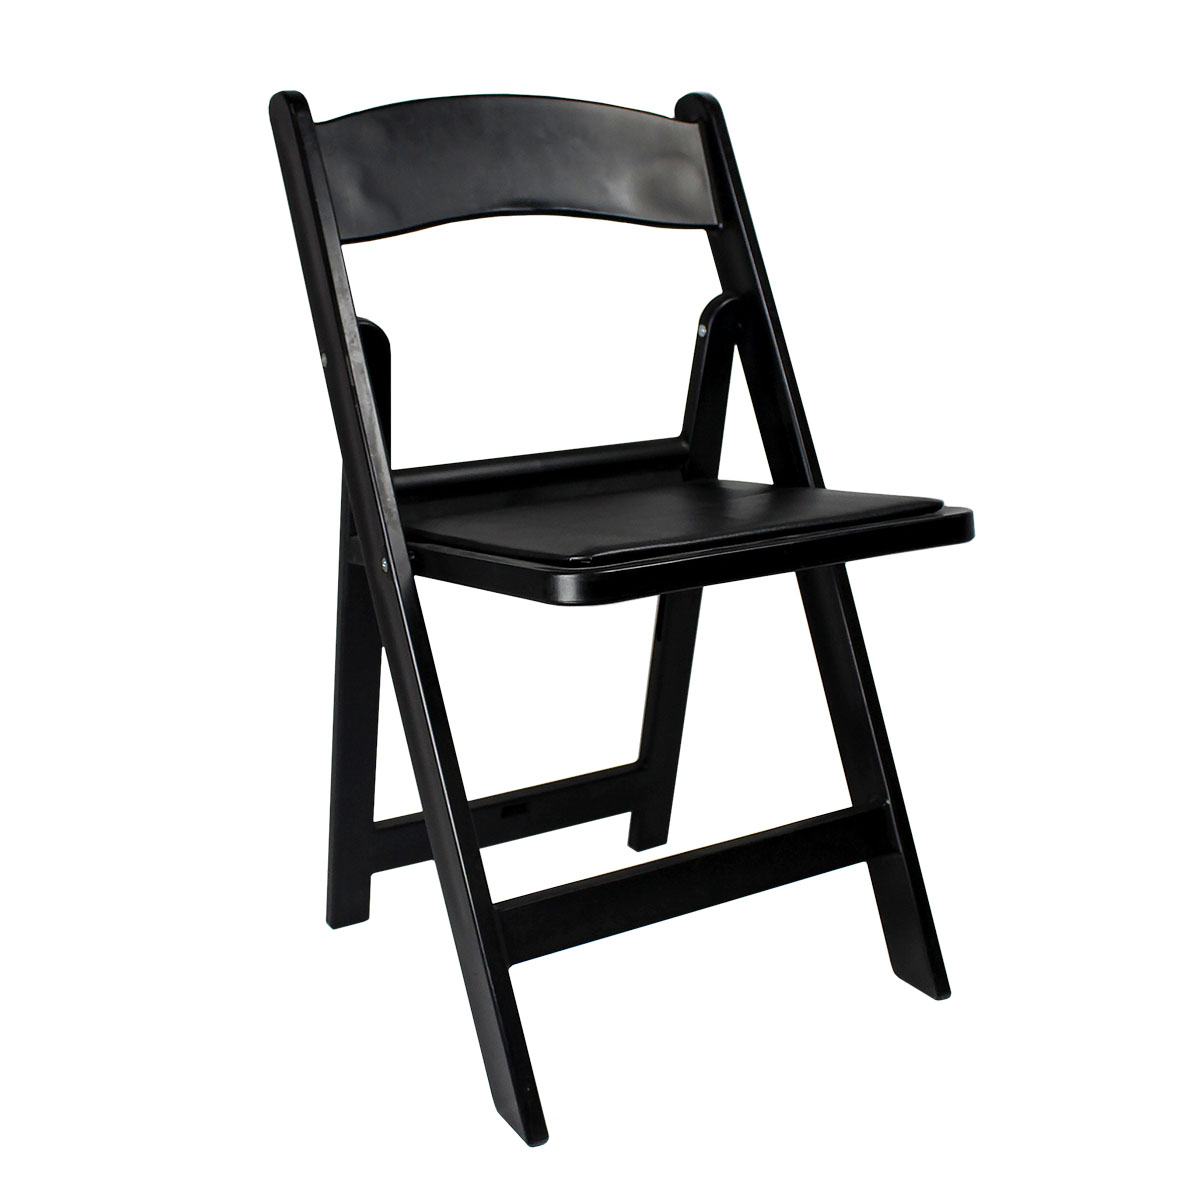 Chair Black Garden With Padded Seat